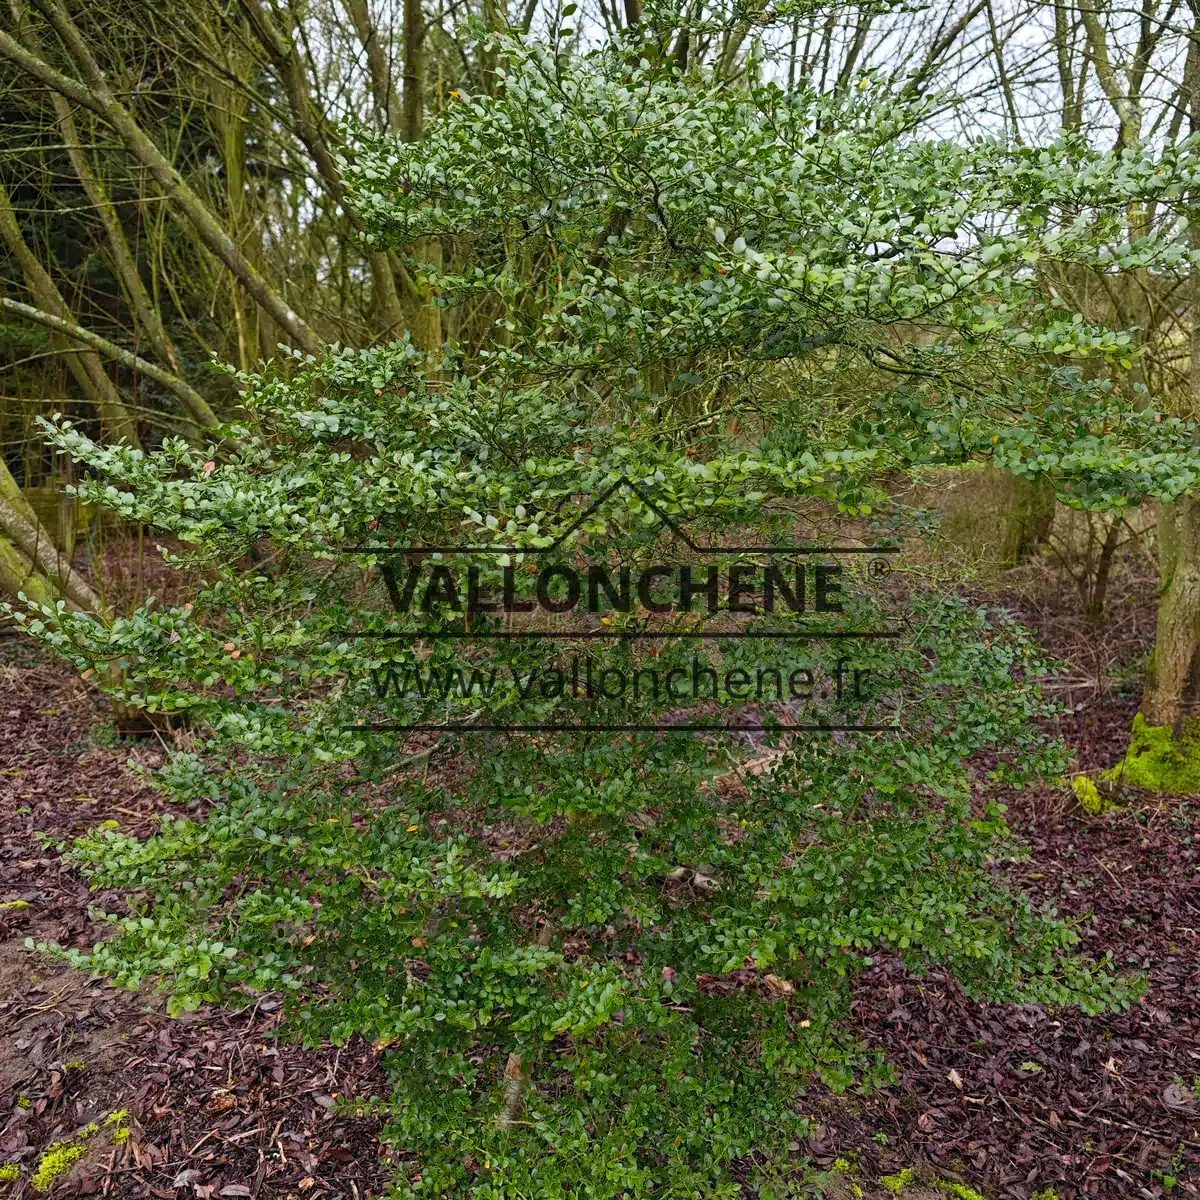 A specimen of 1.80 m and a dozen years old of NOTHOFAGUS betuloides in the Vallonchêne Garden